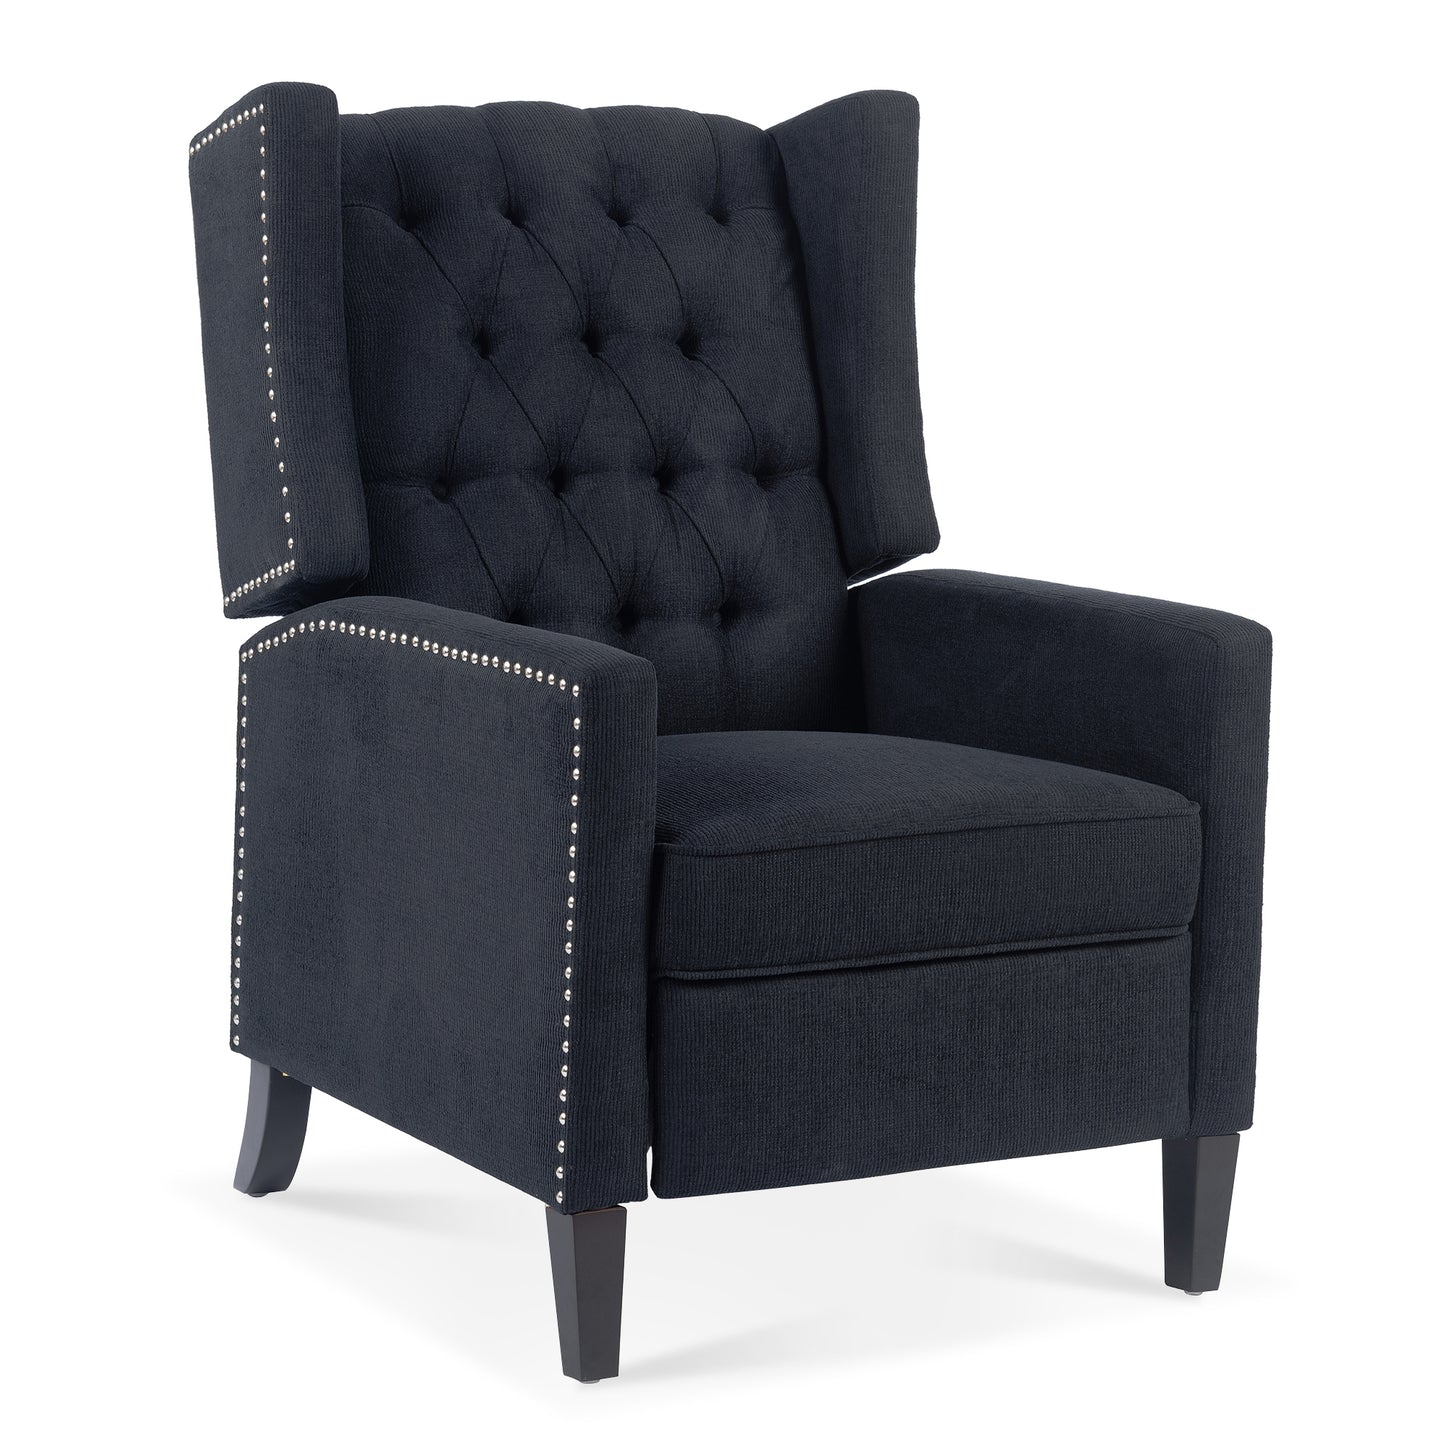 27.16" Wide Manual Wing Chair Recliner